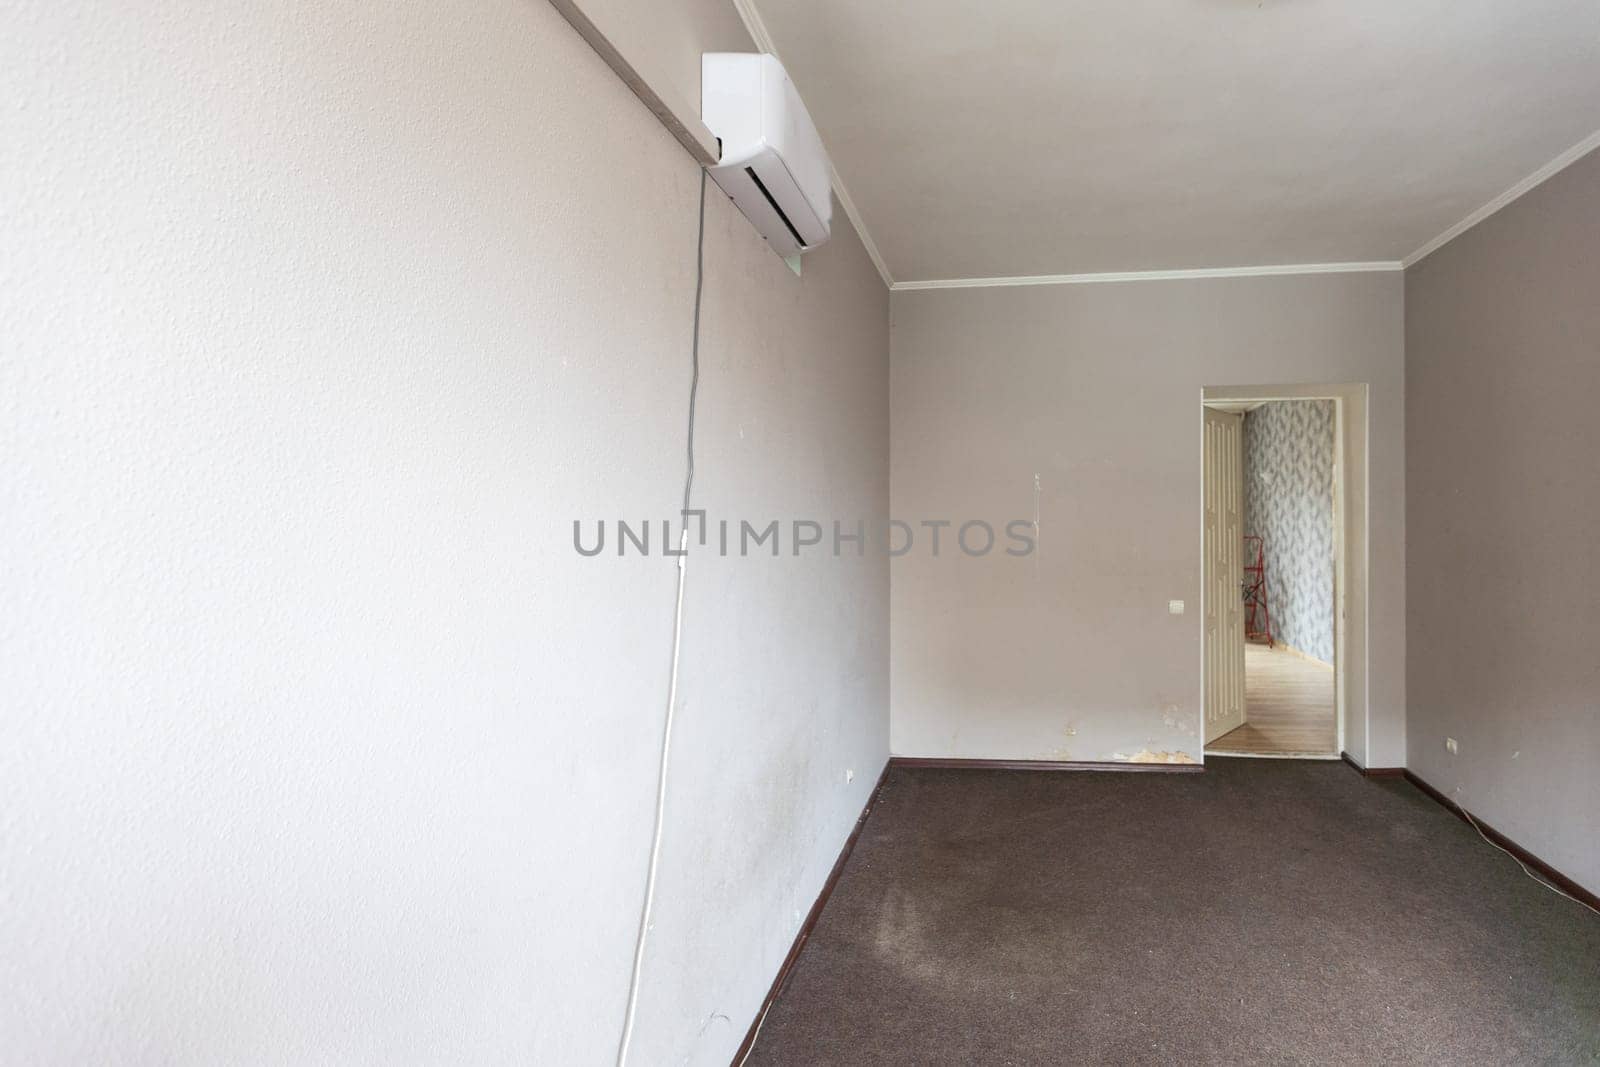 old demolished and dirty room. High quality photo